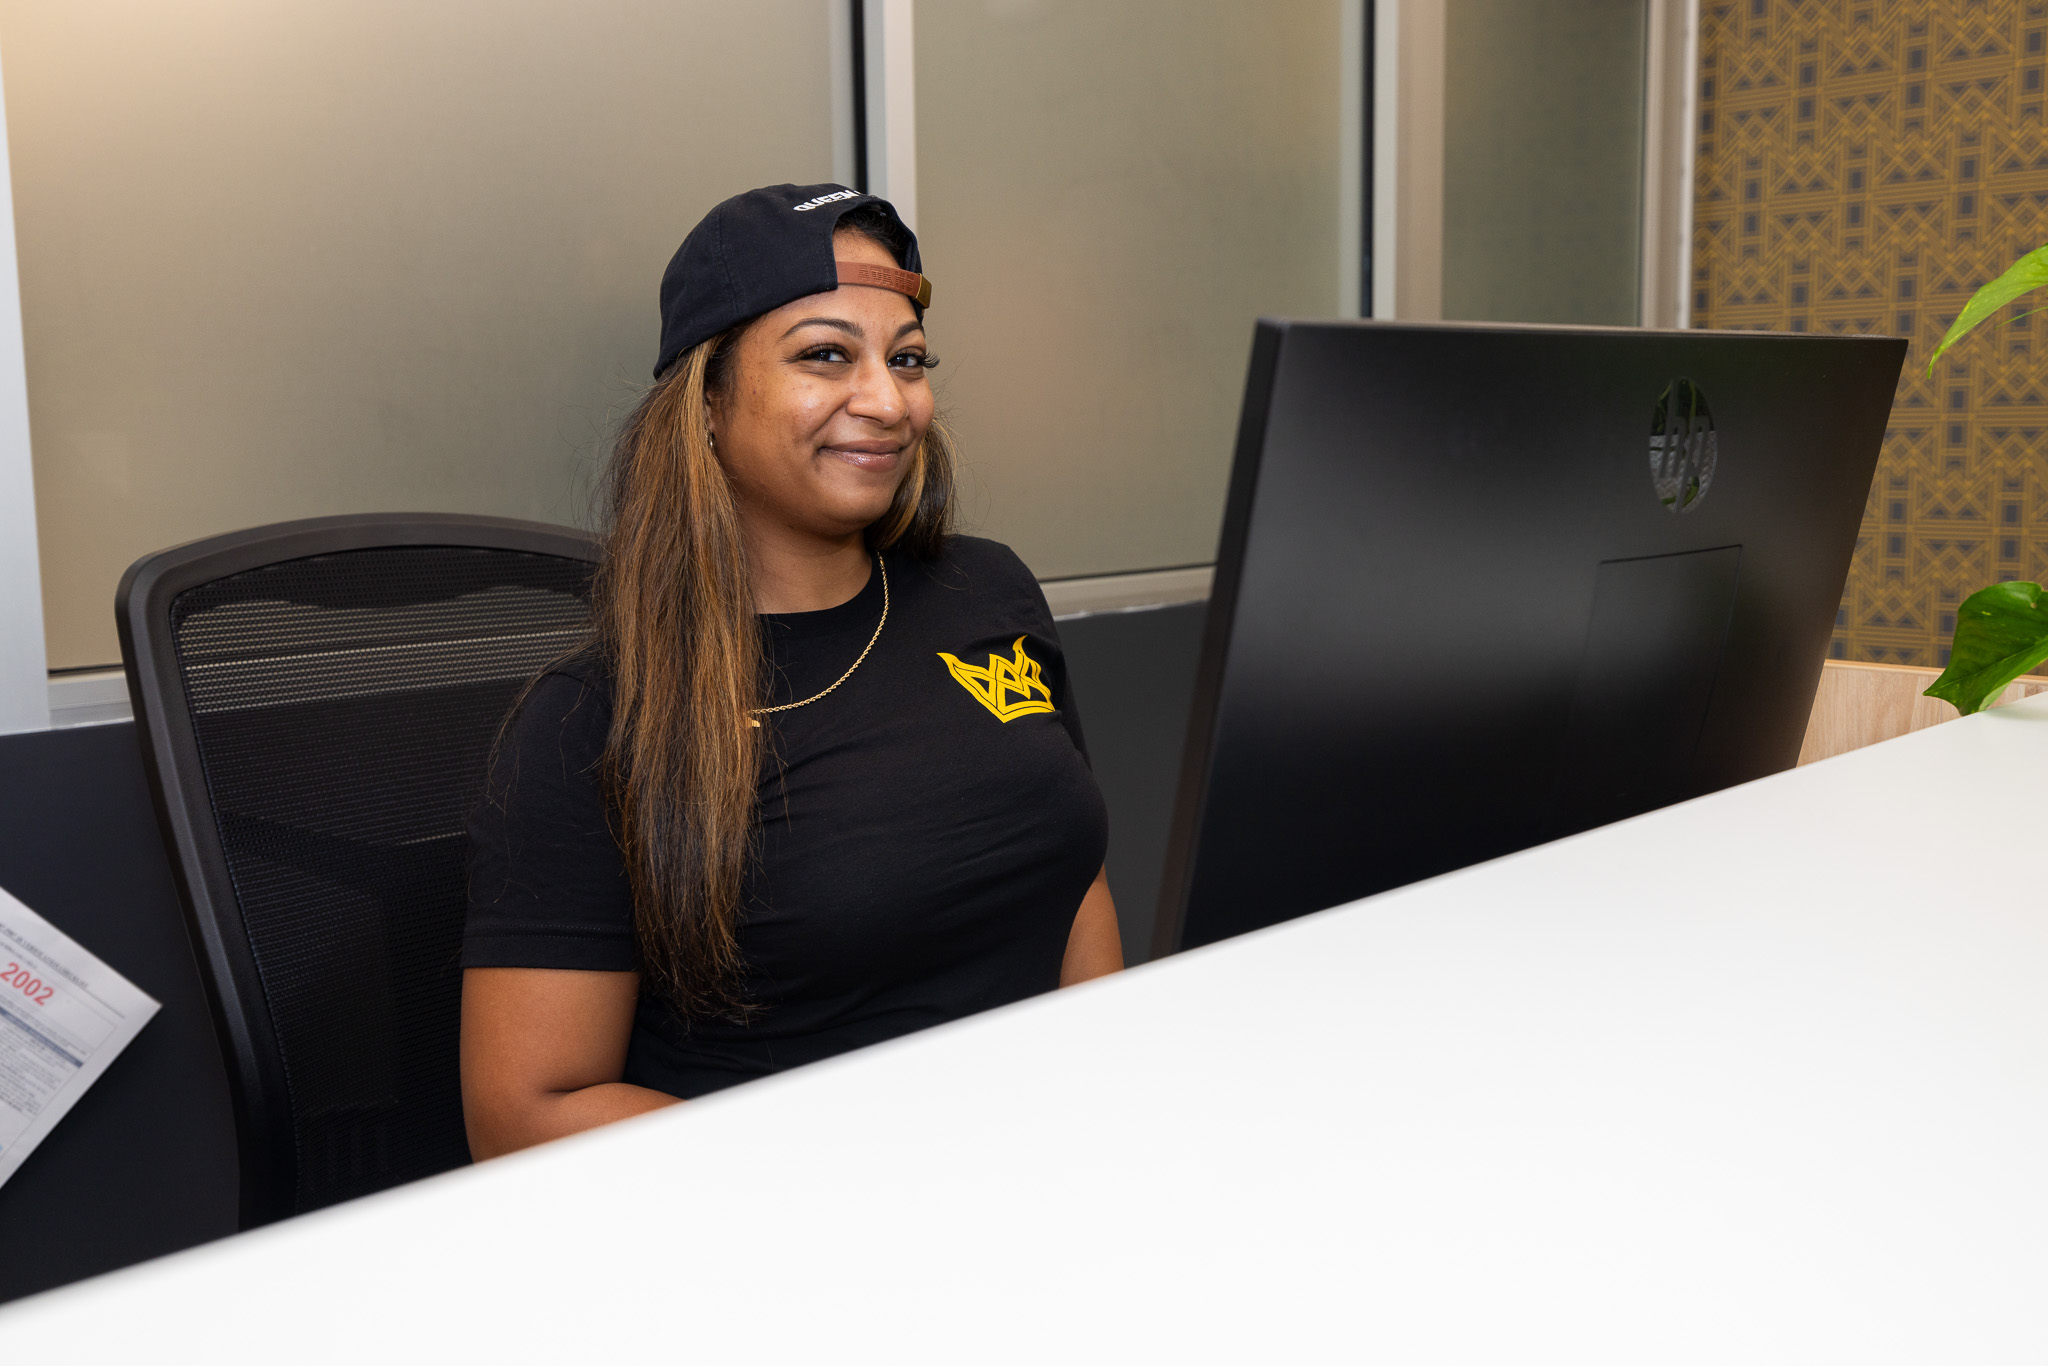 Queen City Dispensary Assistant General Manager Ariell Hunt poses behind the check-in desk at Queen City. She is sitting in a chair and wearing a black baseball cap backward. She is wearing a black t-shirt with the Queen City logo on it. Her hair is straight.